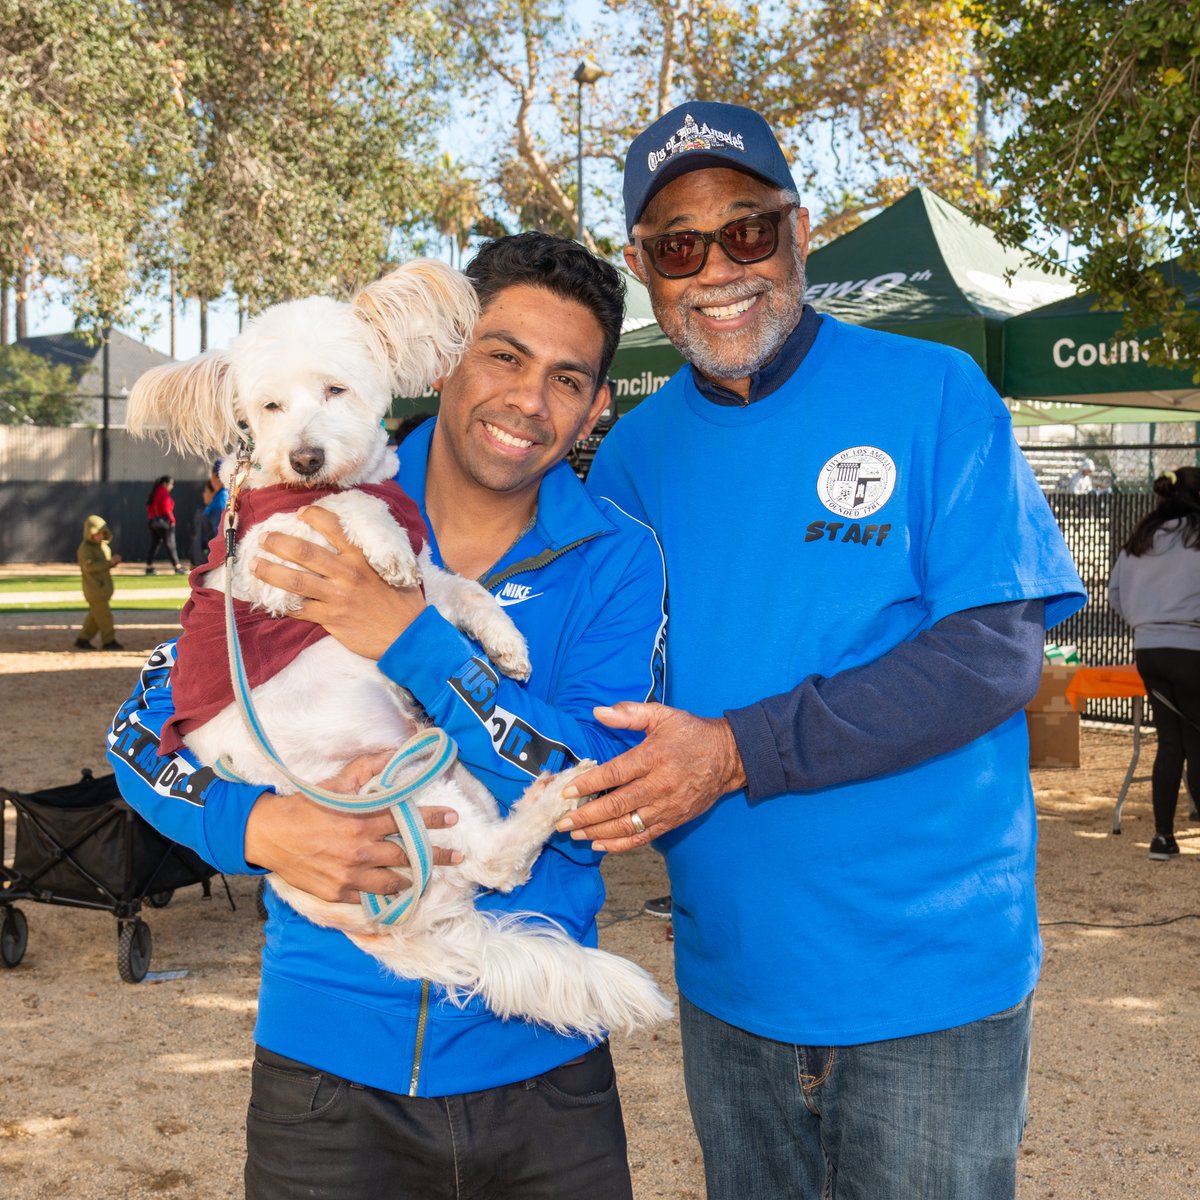 Happy National Pet Day to all our furry friends who frequent our dog parks! 🐶🐕

Take your pet out to one of our many dog parks today to celebrate and send us a pic so we can post it!

#lacityparks #parkproudla #everythingunderthesun